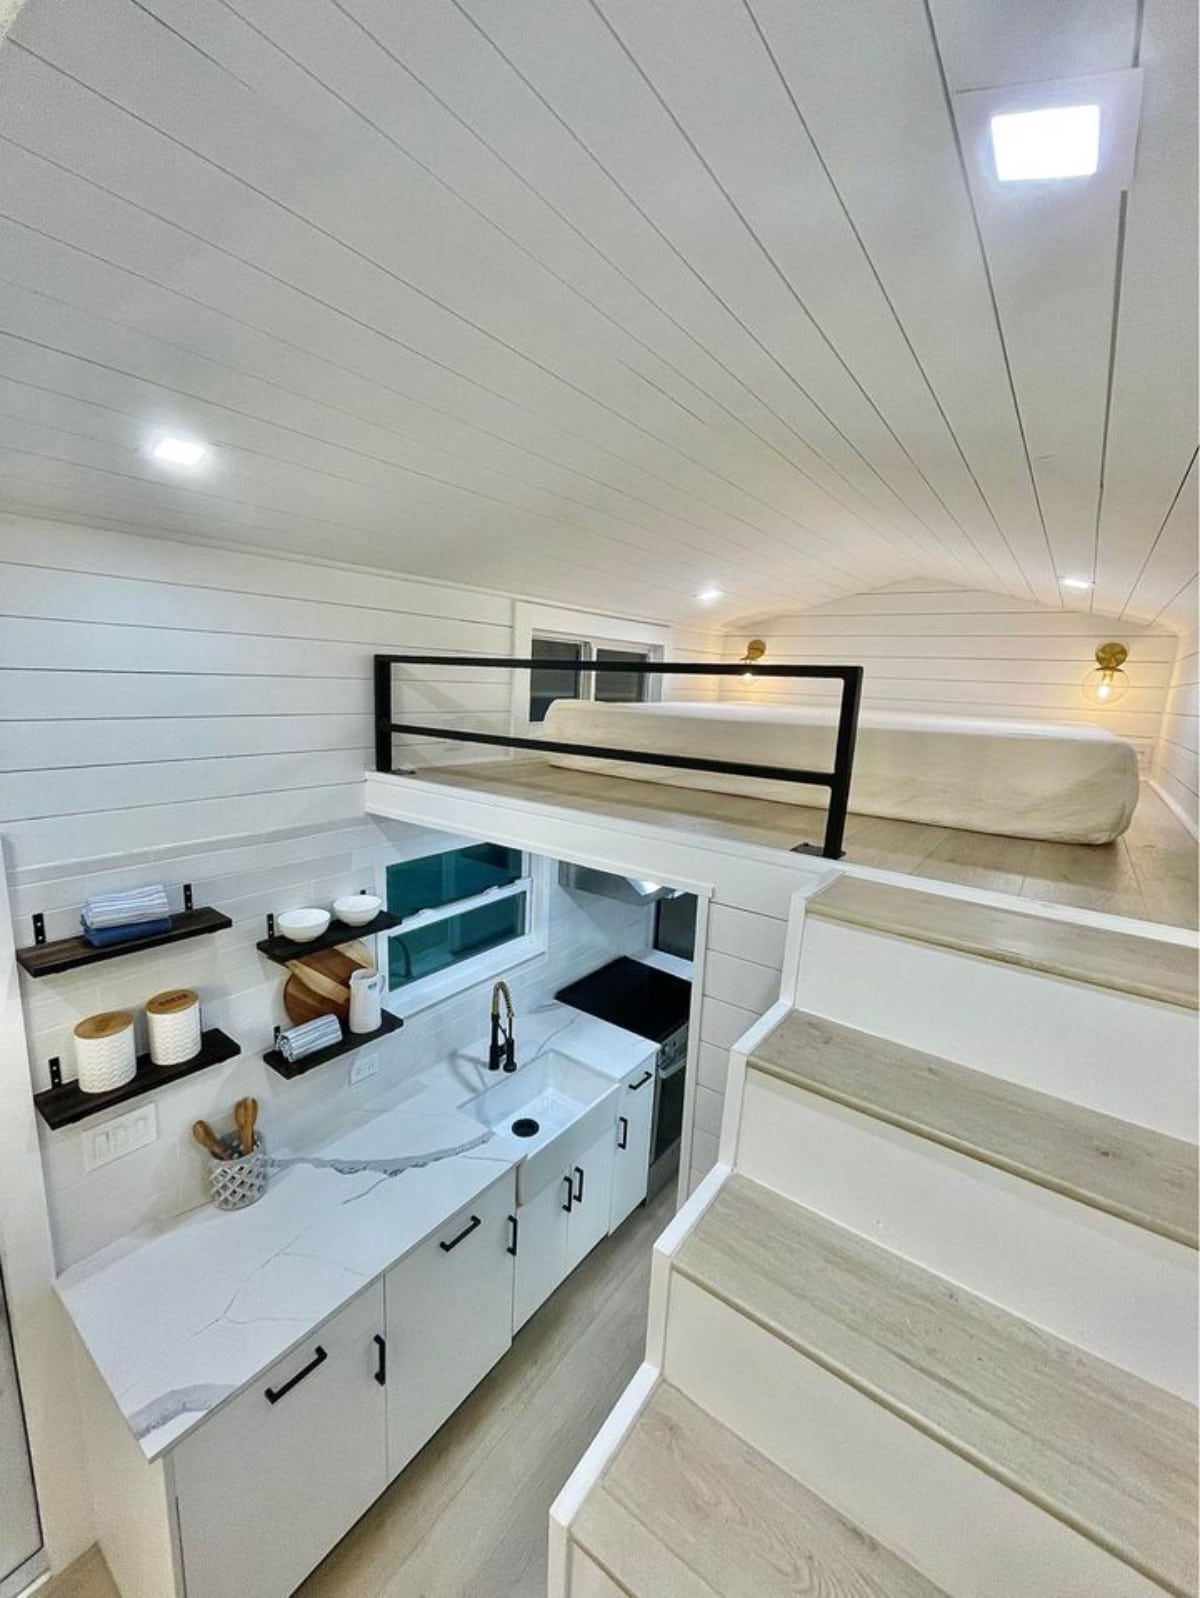 Storage space and kitchen area below the stairs and loft bedroom of New 24' Luxury Tiny Home